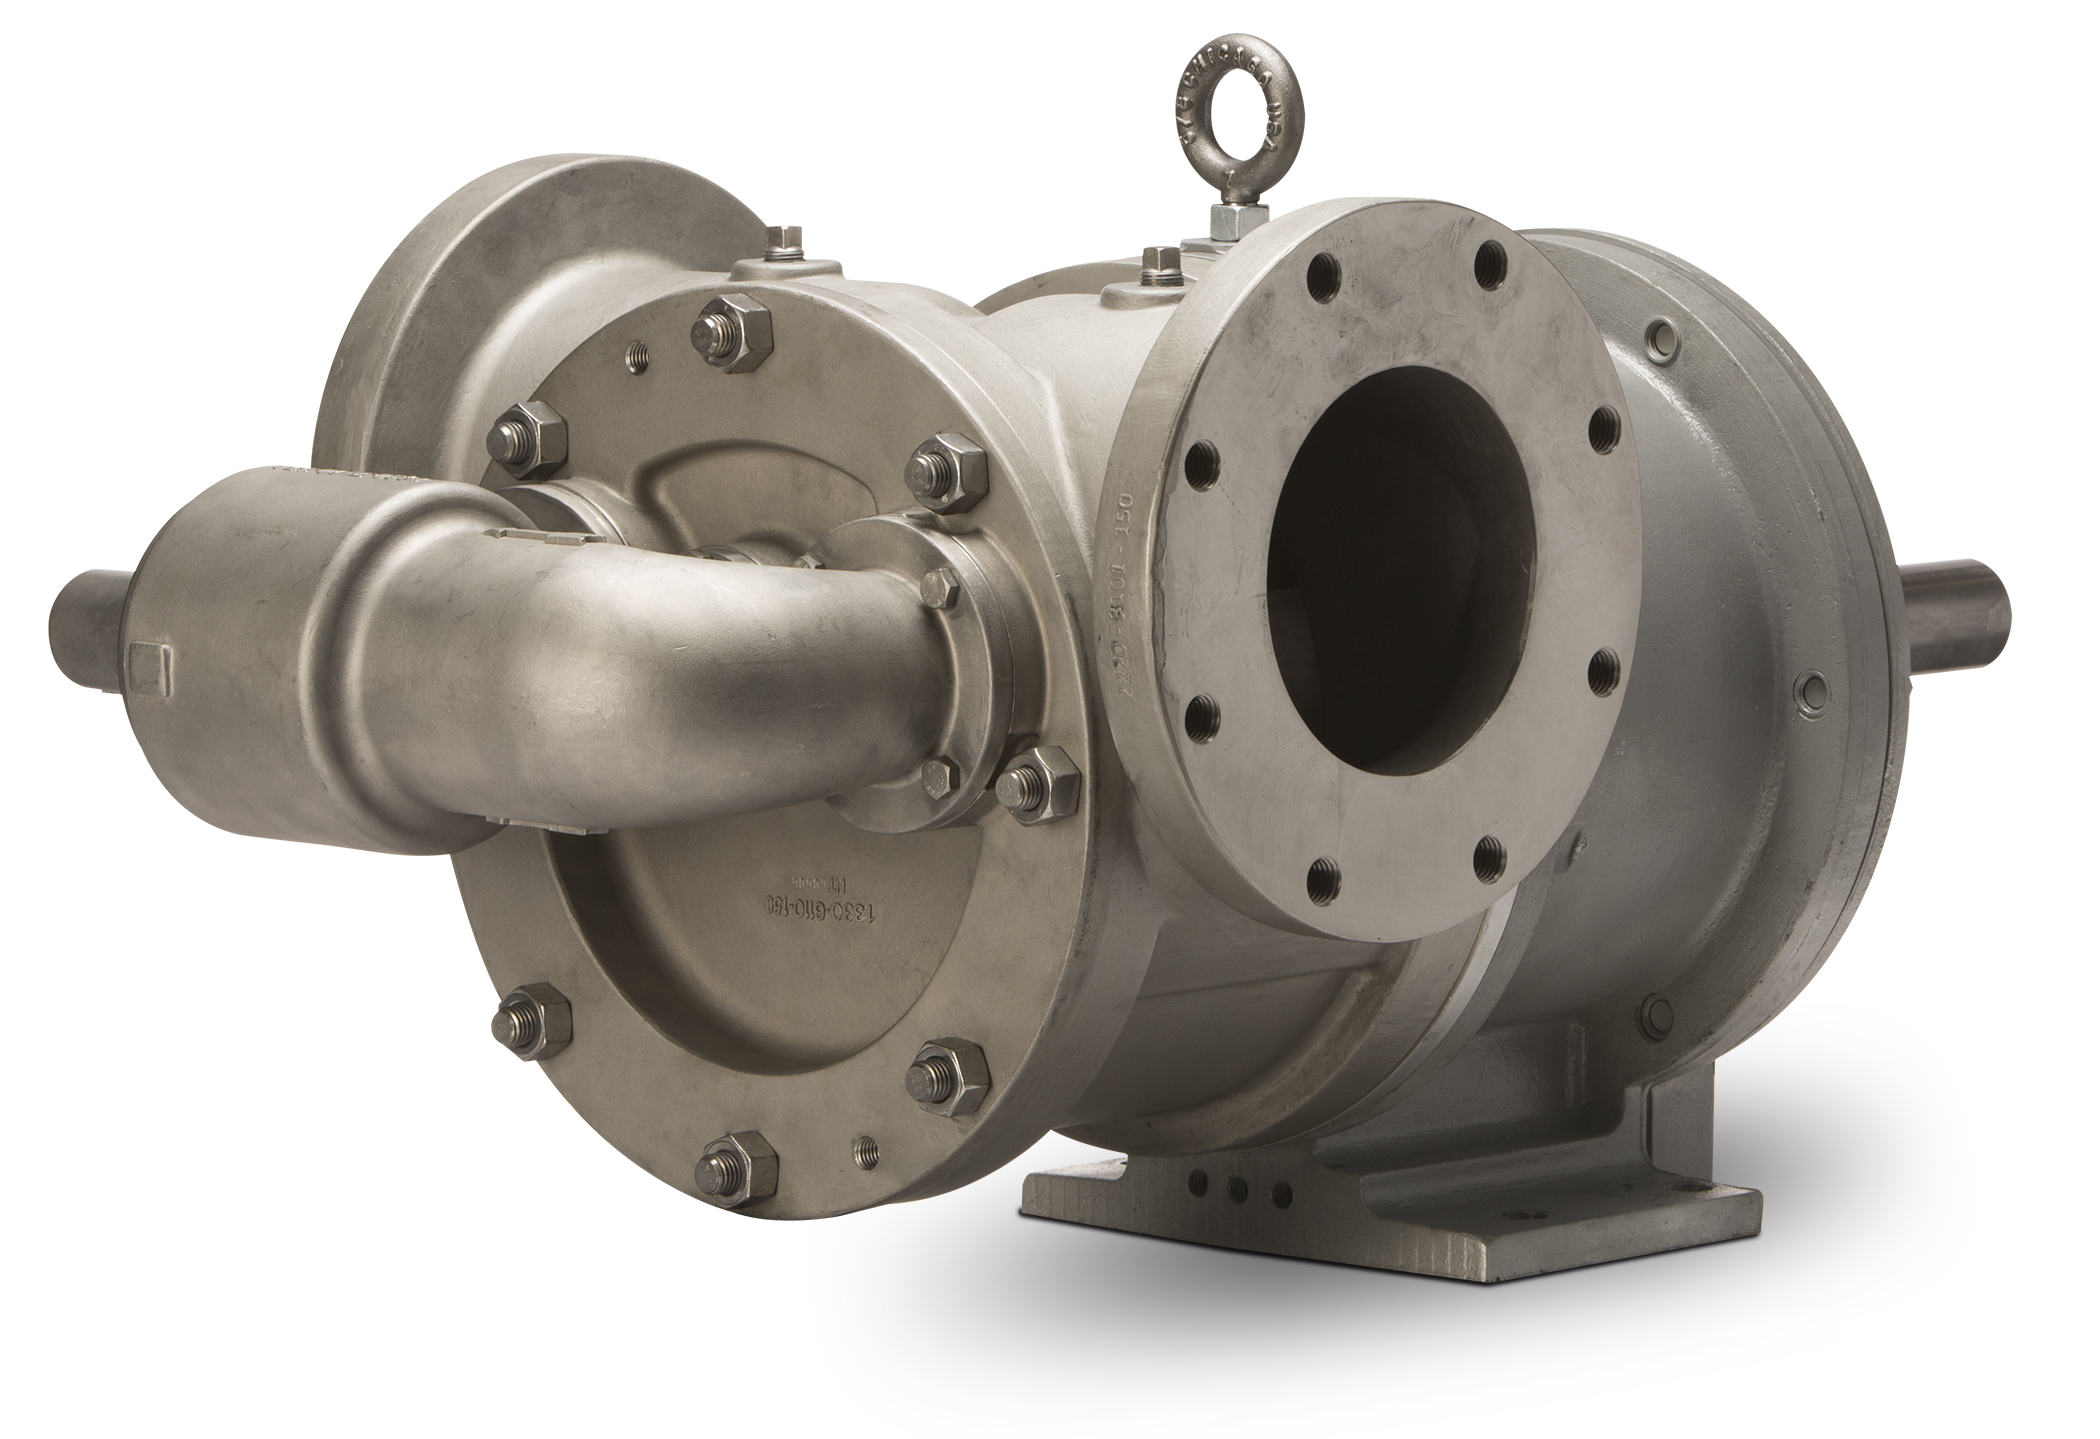 E Series pumps are available in 1-1/2-, 2-, 3-, 4- and 6 inch port sizes with discharge pressures up to 200 psig (13.8 bar).